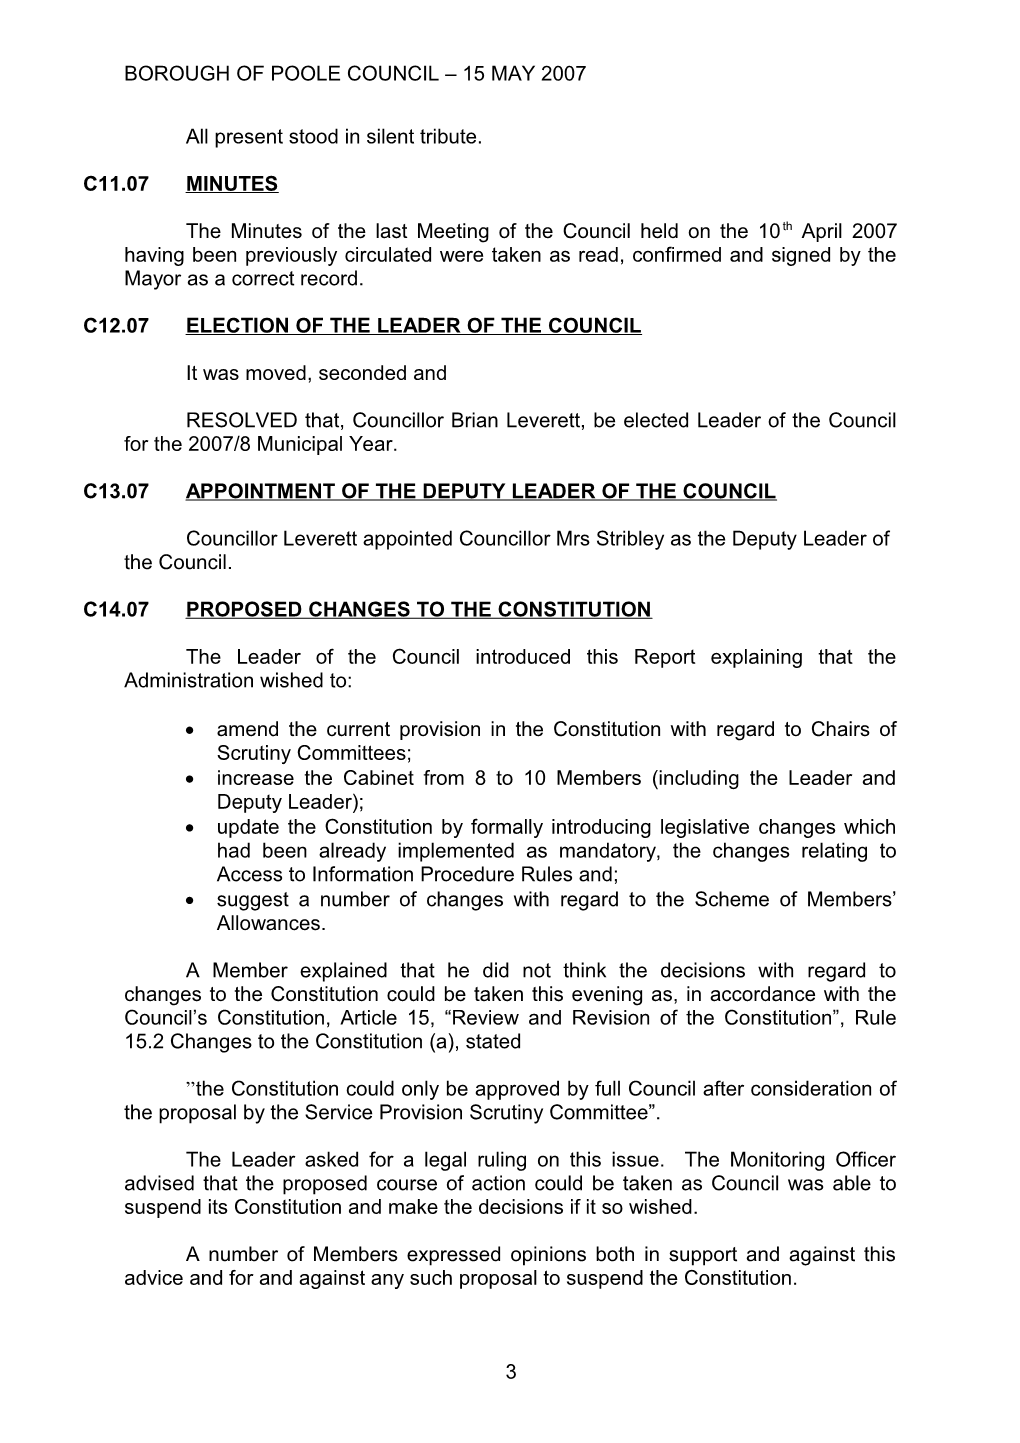 Minutes of the Meeting of the Annual Council